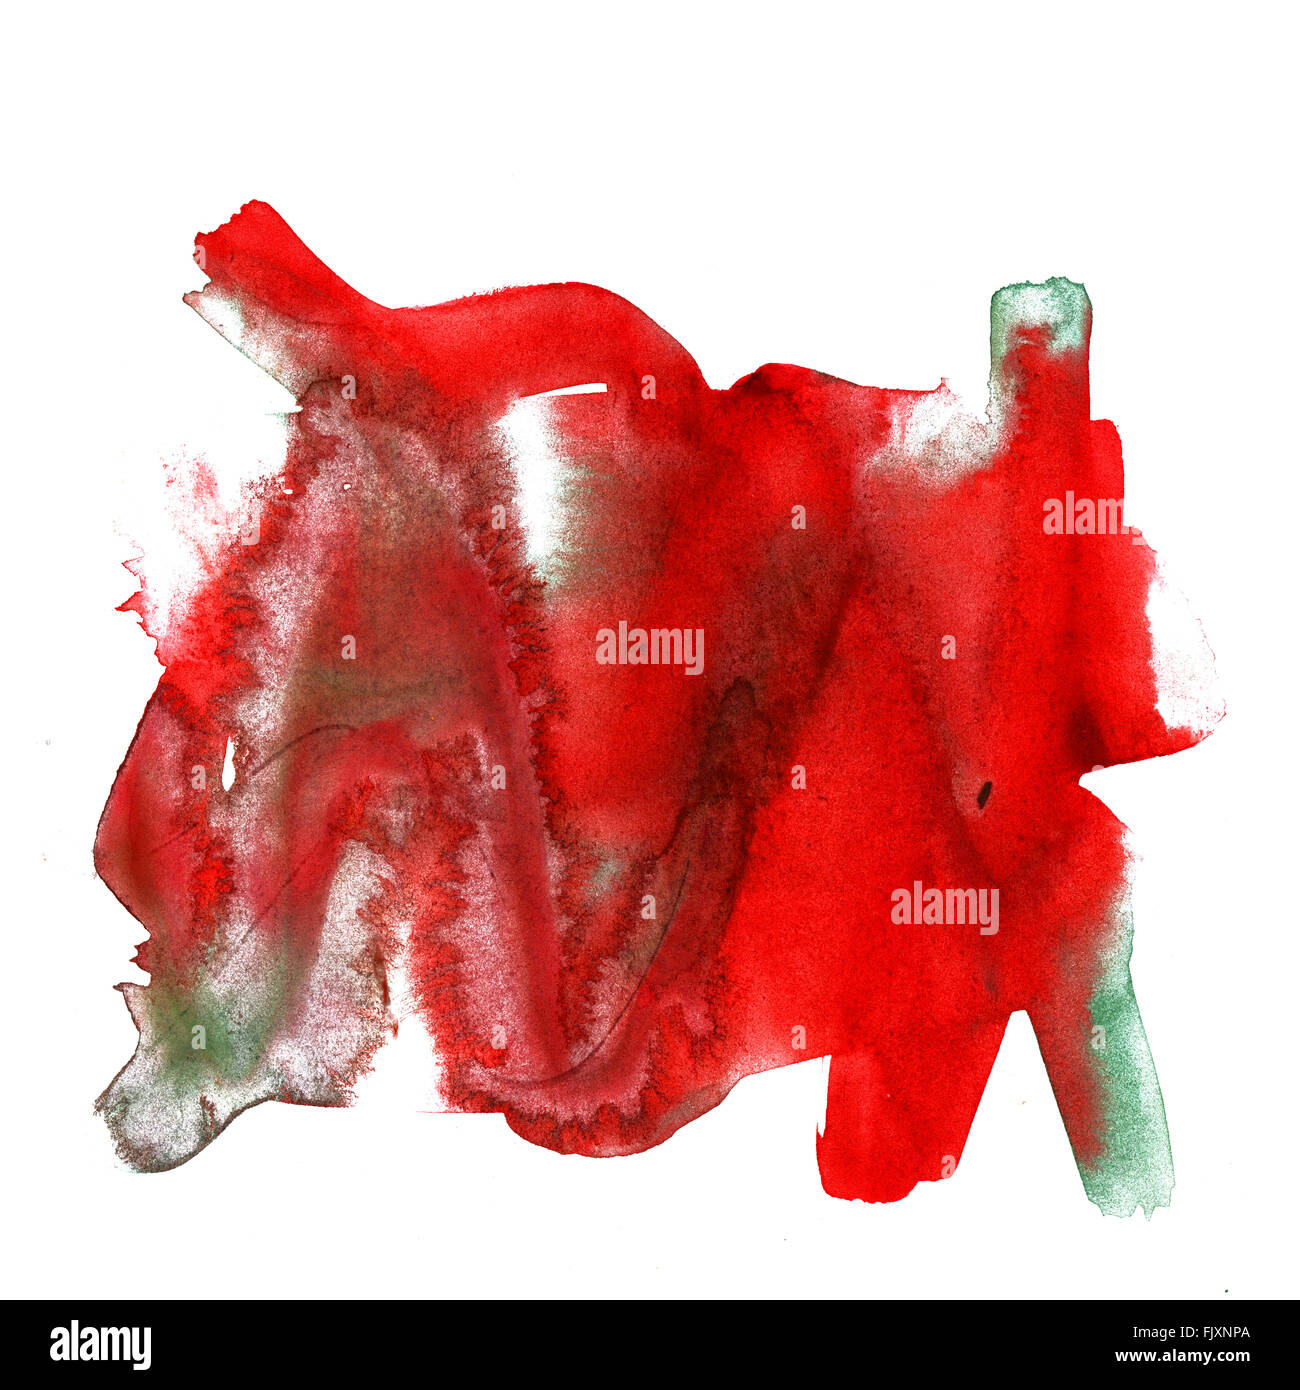 red paint brush stroke effect Stock Photo - Alamy